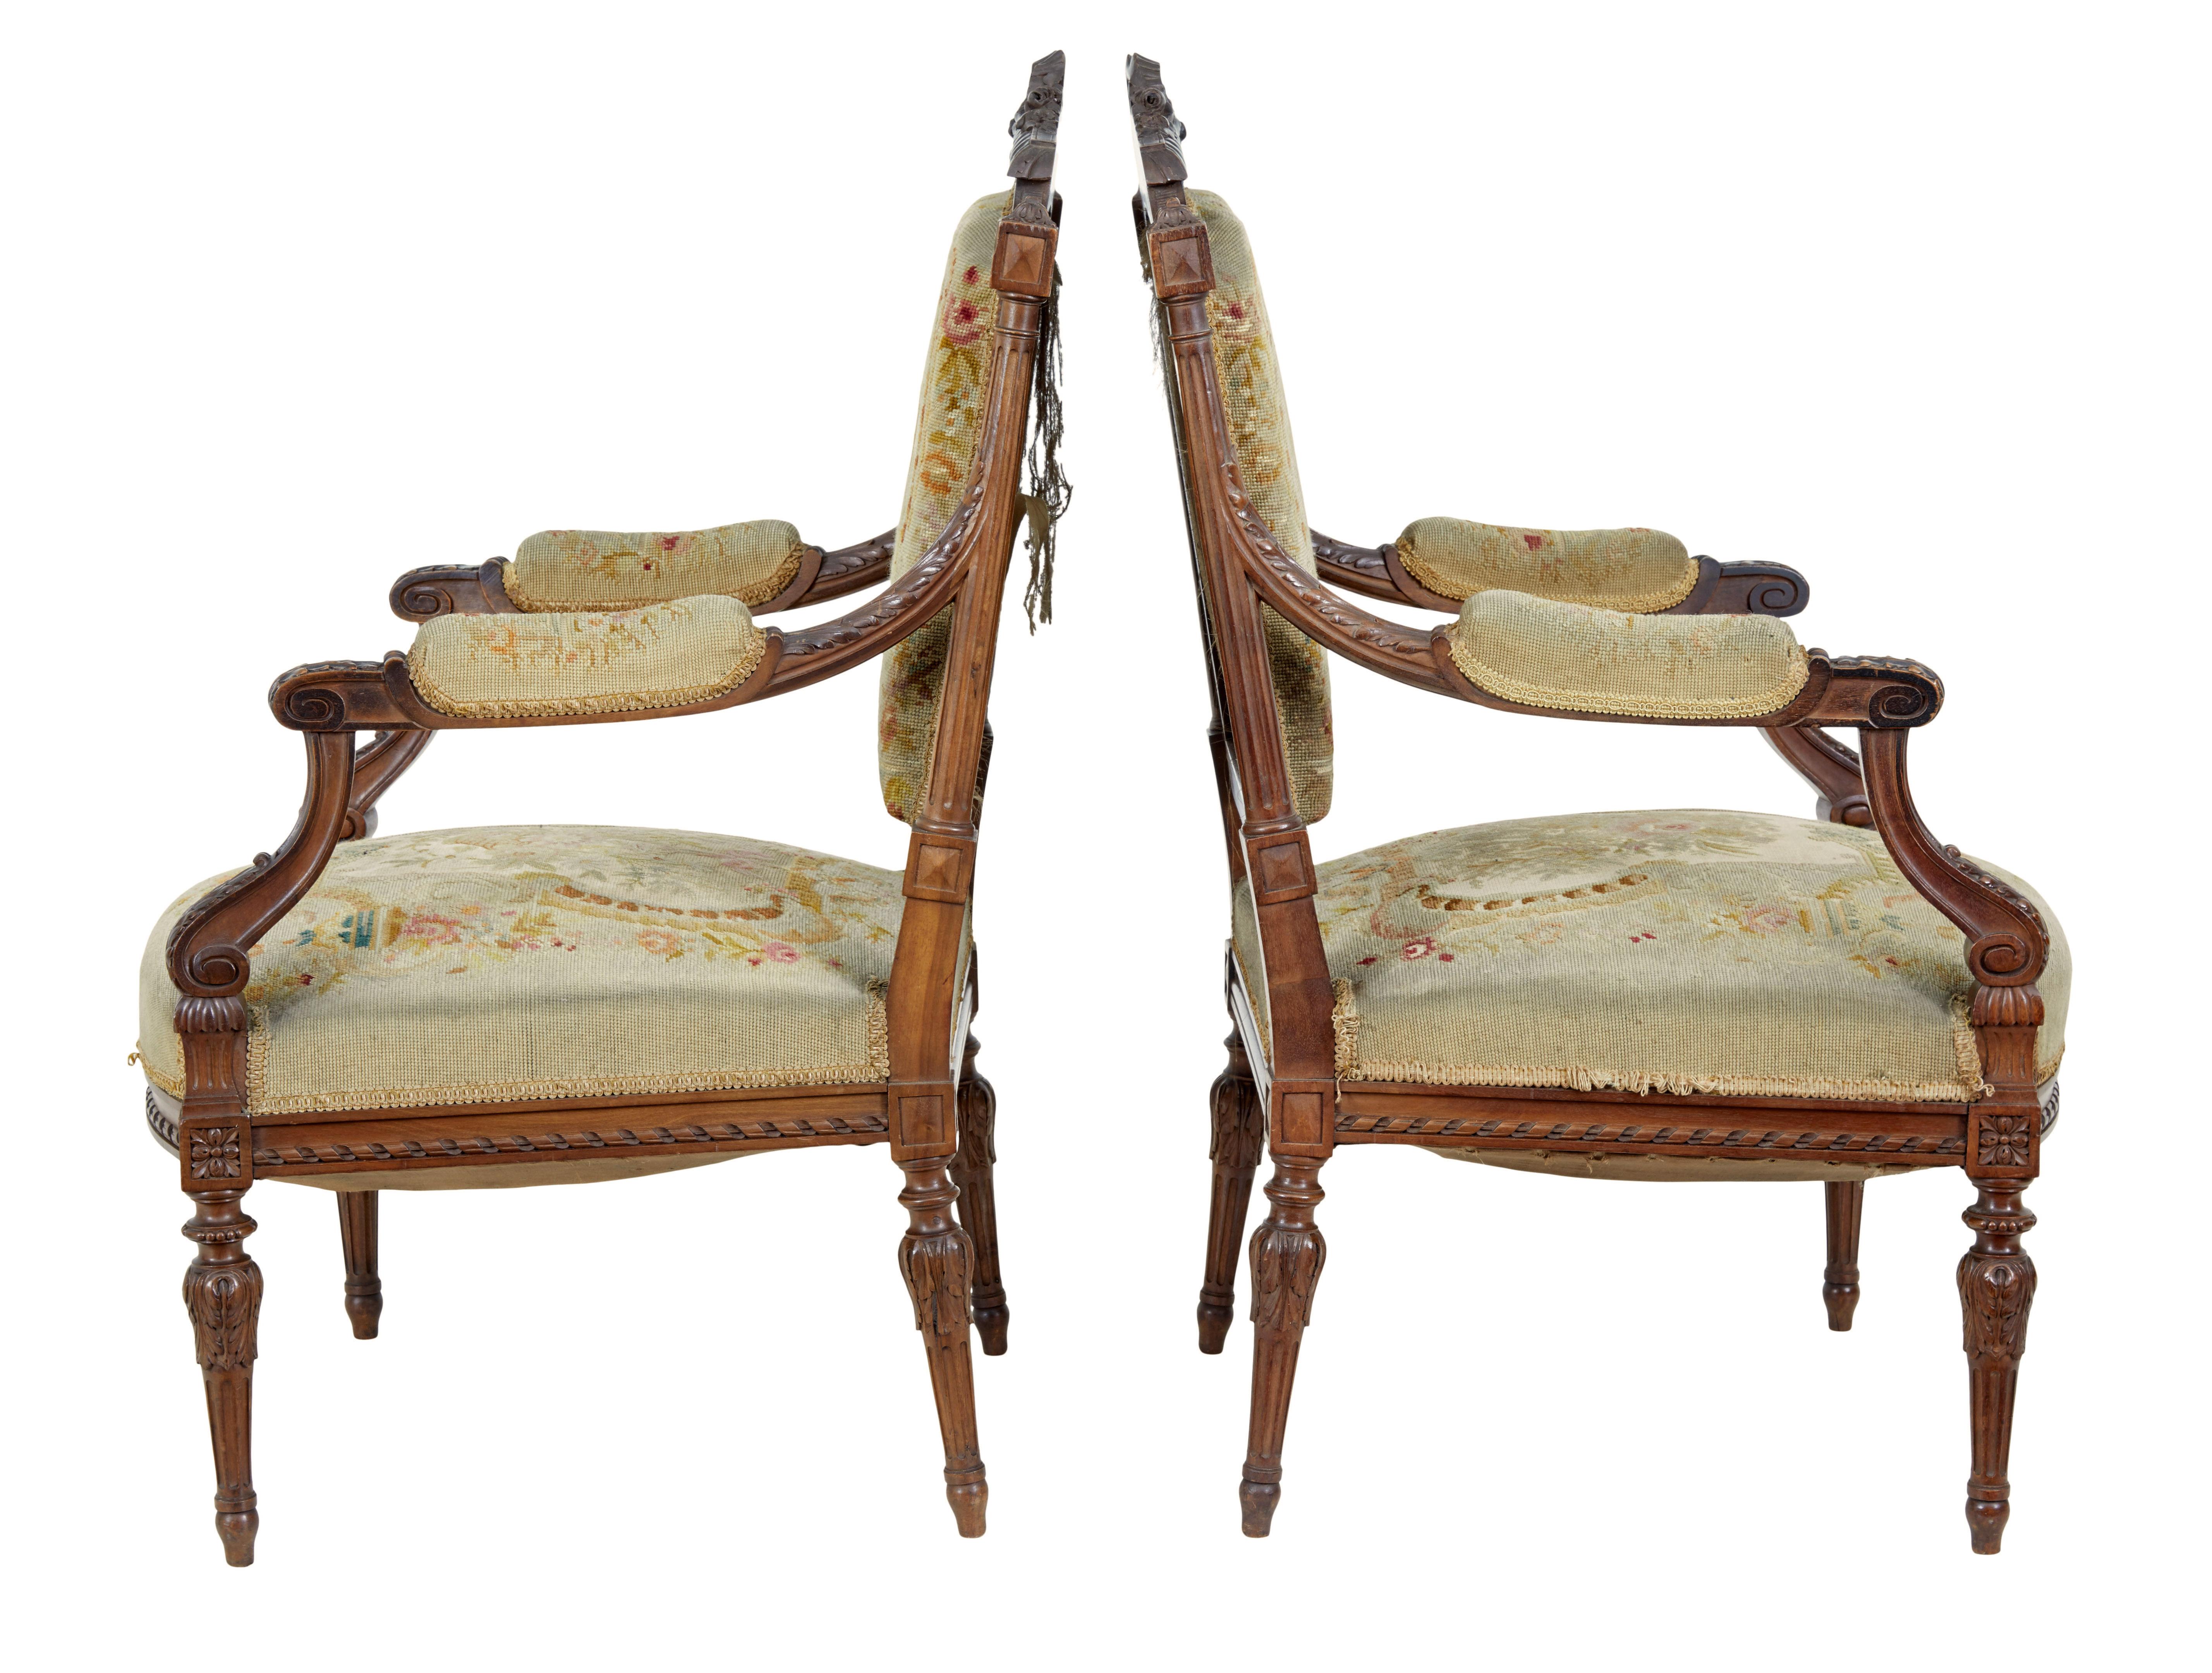 19th century french carved walnut tapestry armchairs circa 1870.

Fine quality pair of french carved armchairs, with fine craftmanship shown in the quality of the carving.

Heavily carved back rests, carved scrolled arms with acanthus leaf detail,